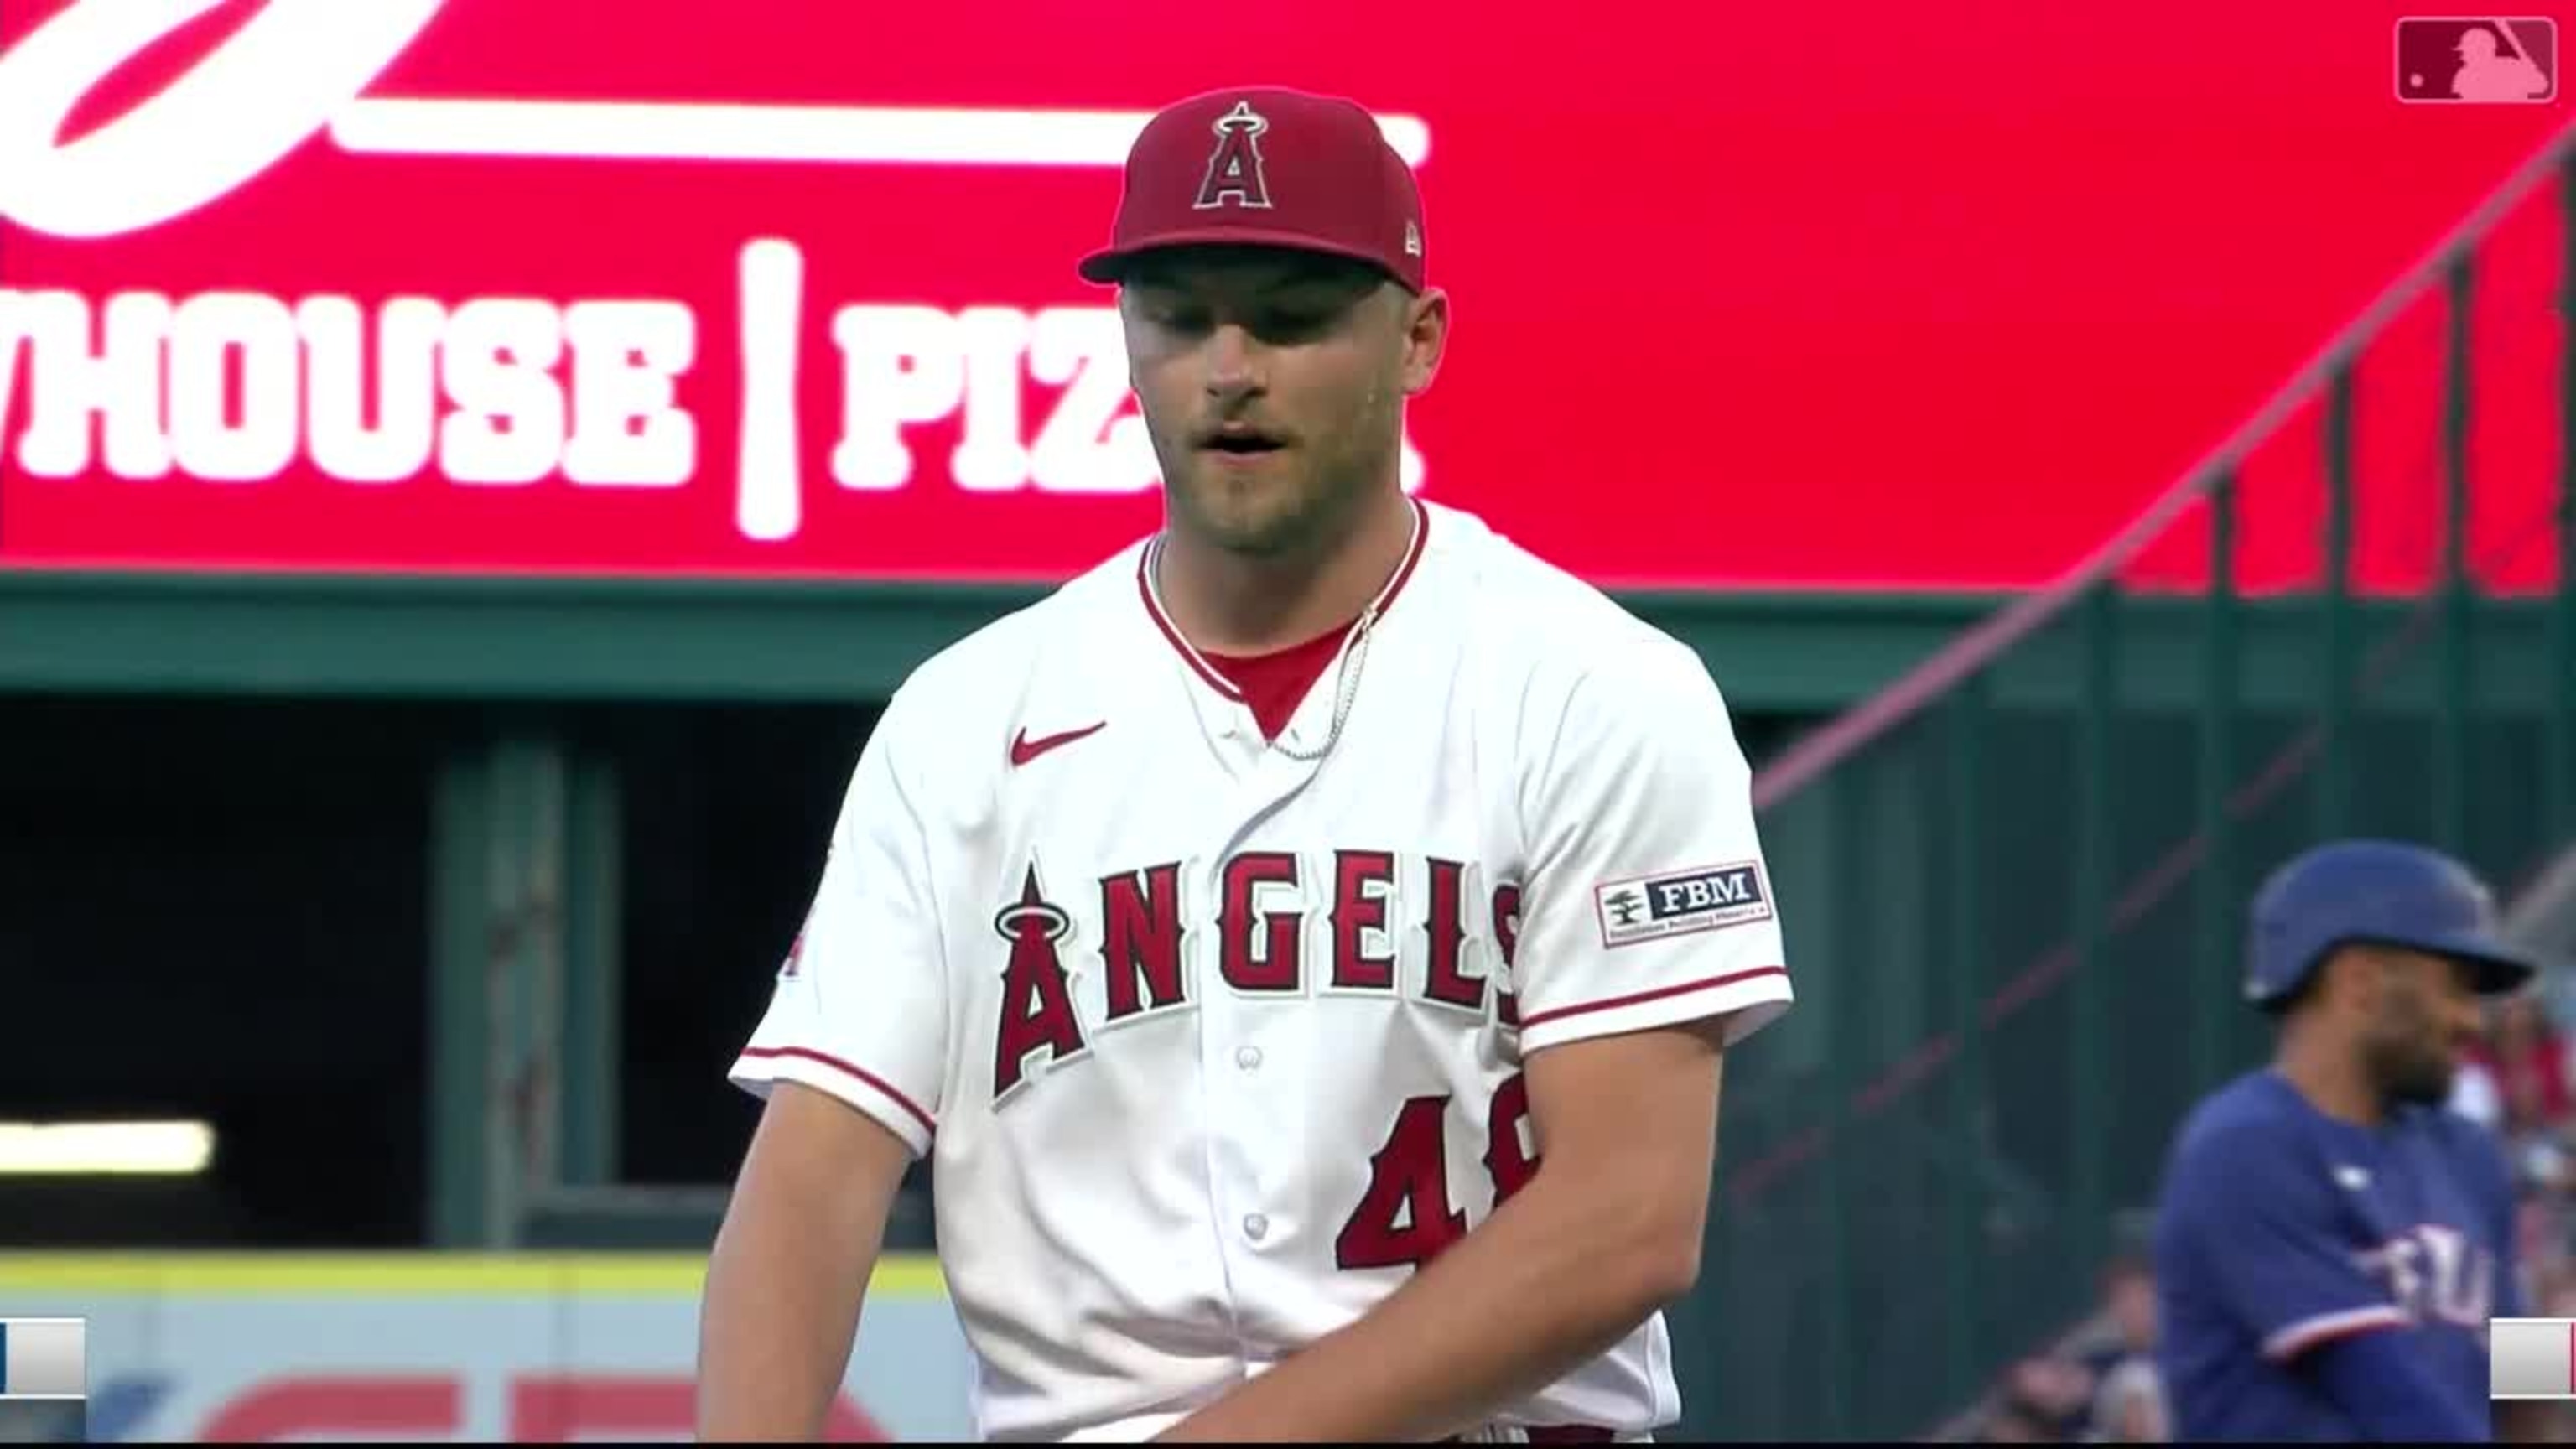 The Rangers mash vs. left-handed pitching, but Angels' Reid Detmers gave  them issues